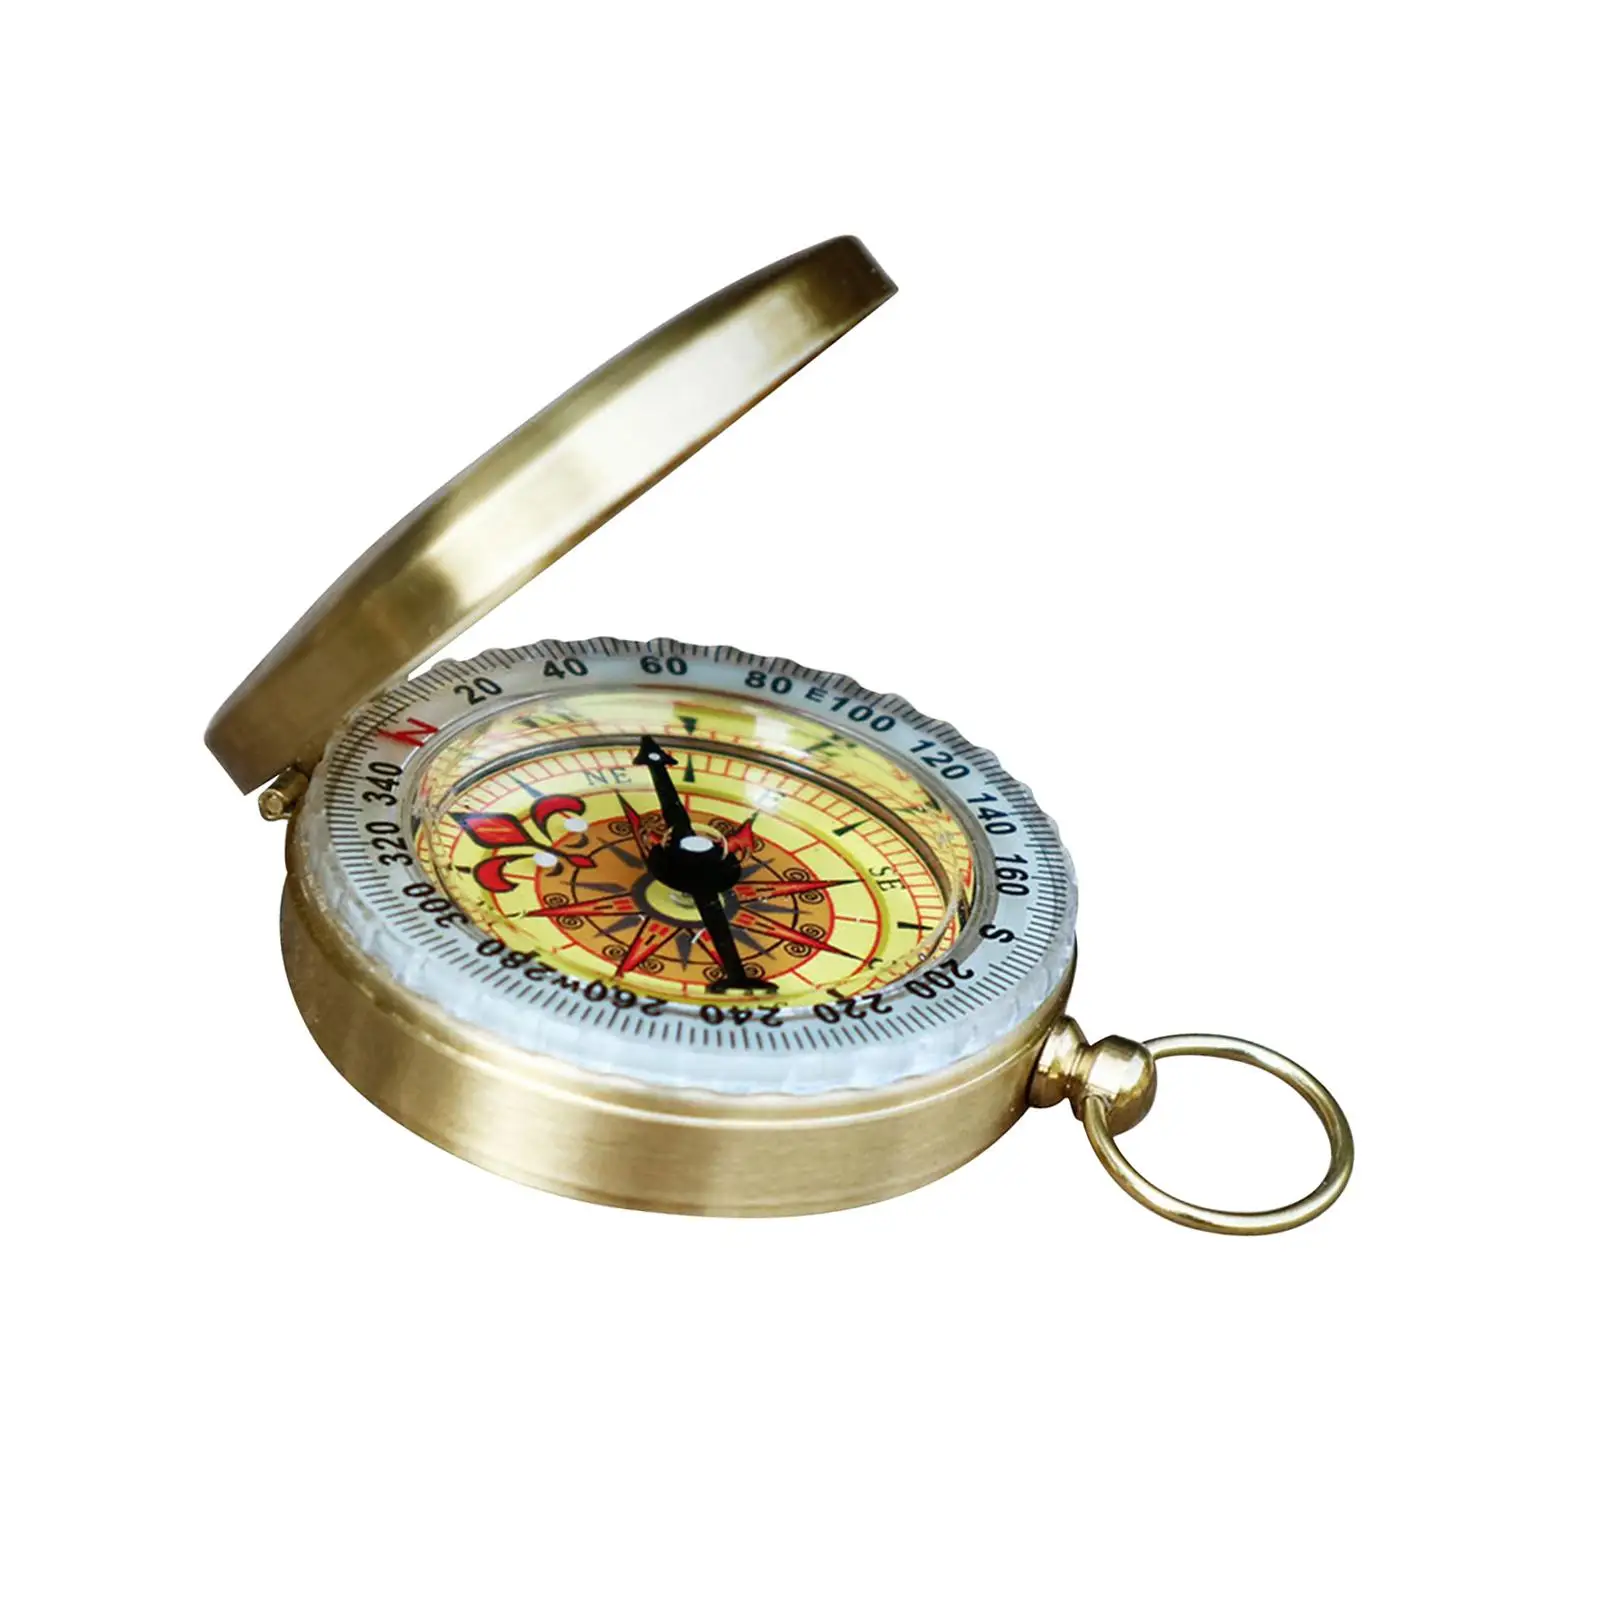 Camping Survival Compass Brass Compass for Backpacking Hiking Orienteering